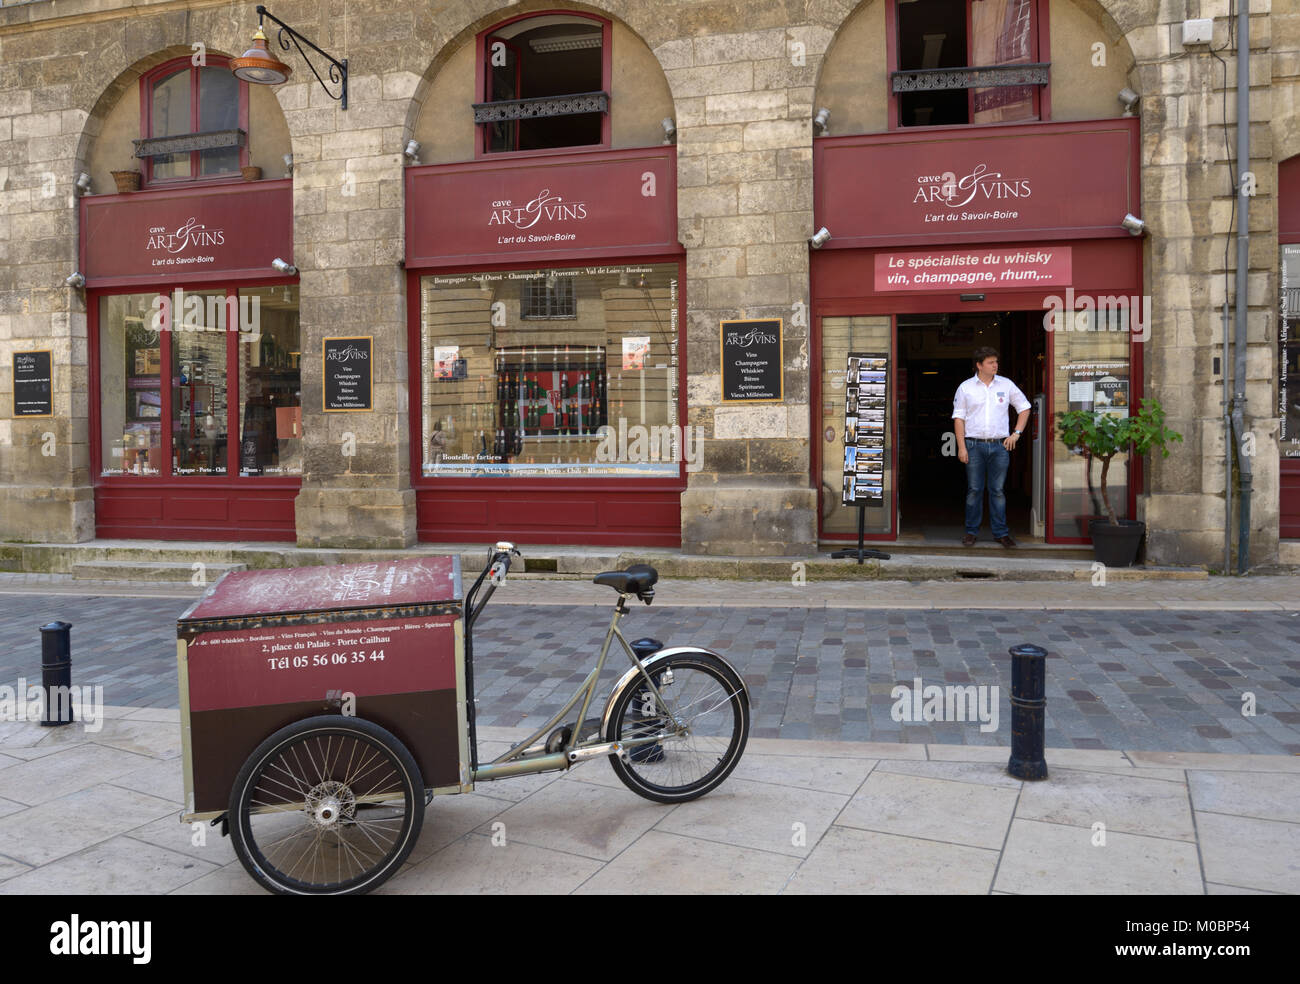 Bordeaux, France - June 27, 2013: Man in doors of the cafe Art Et Vins on the Palace square. This wine trading house works only with authentic wines a Stock Photo